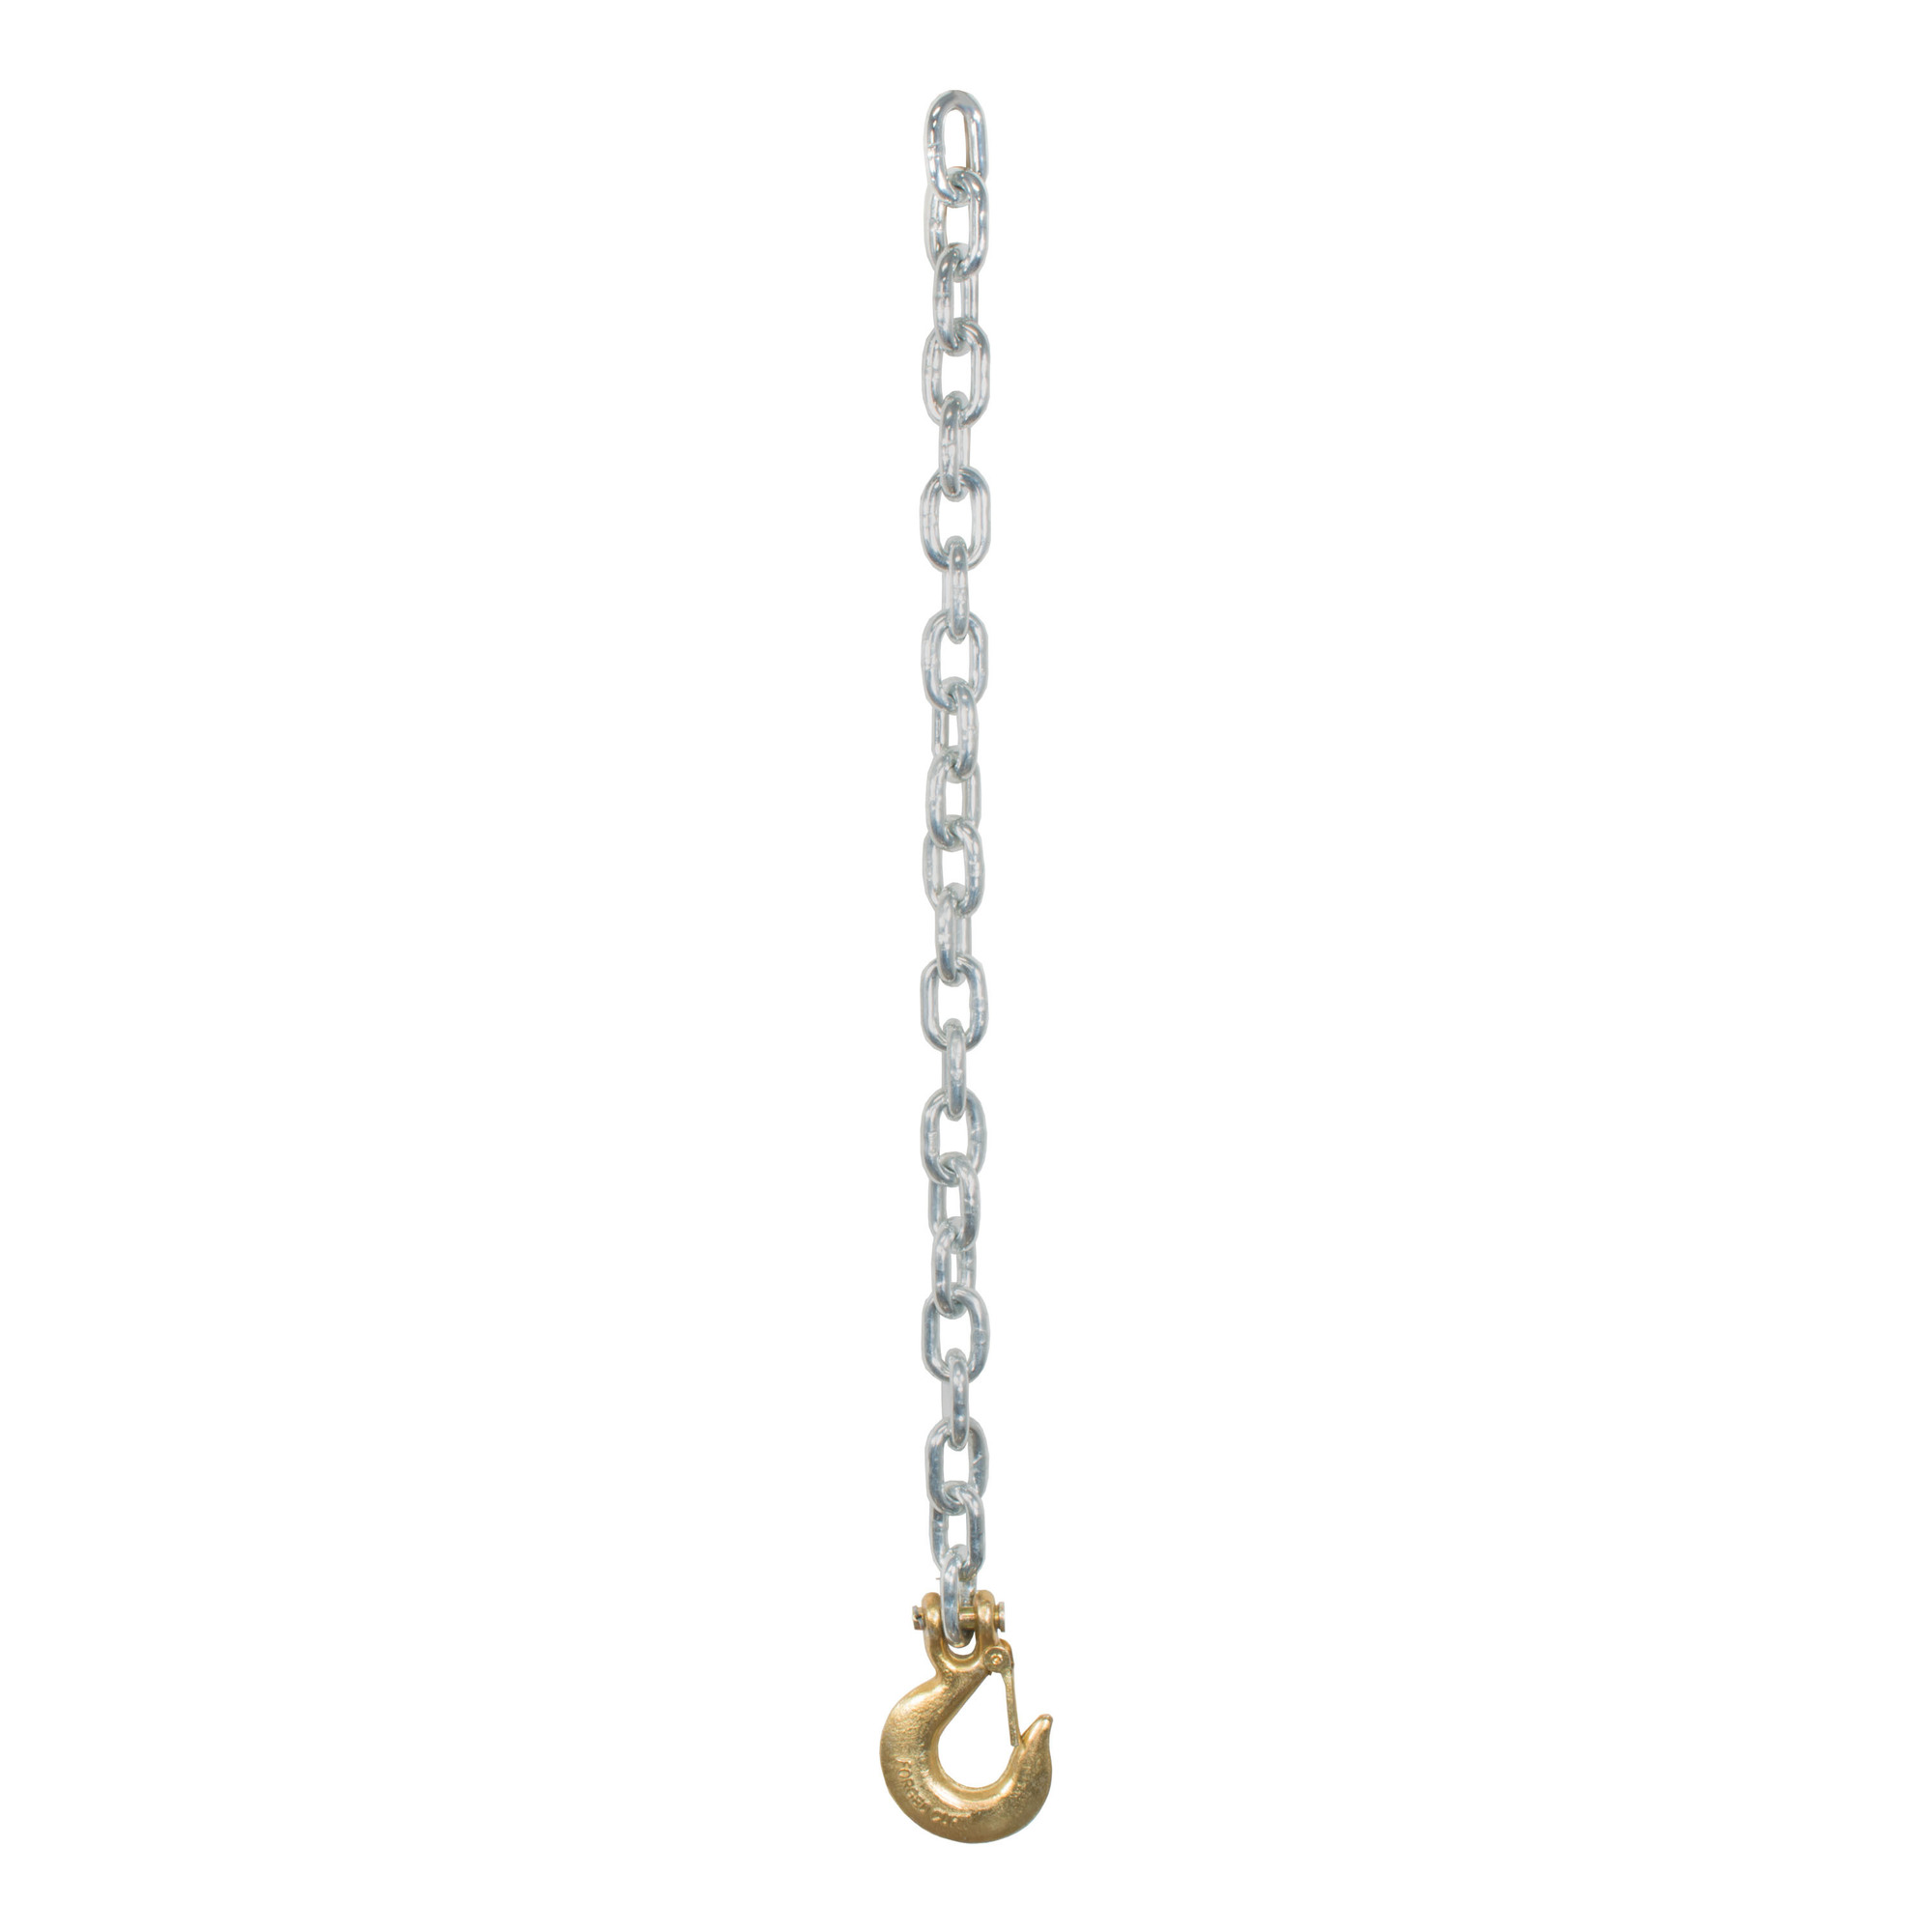 Curt Manufacturing, 35Inch Safety Chain with 1 Clevis Hook, Length 35 in, Material Steel, Model 80315